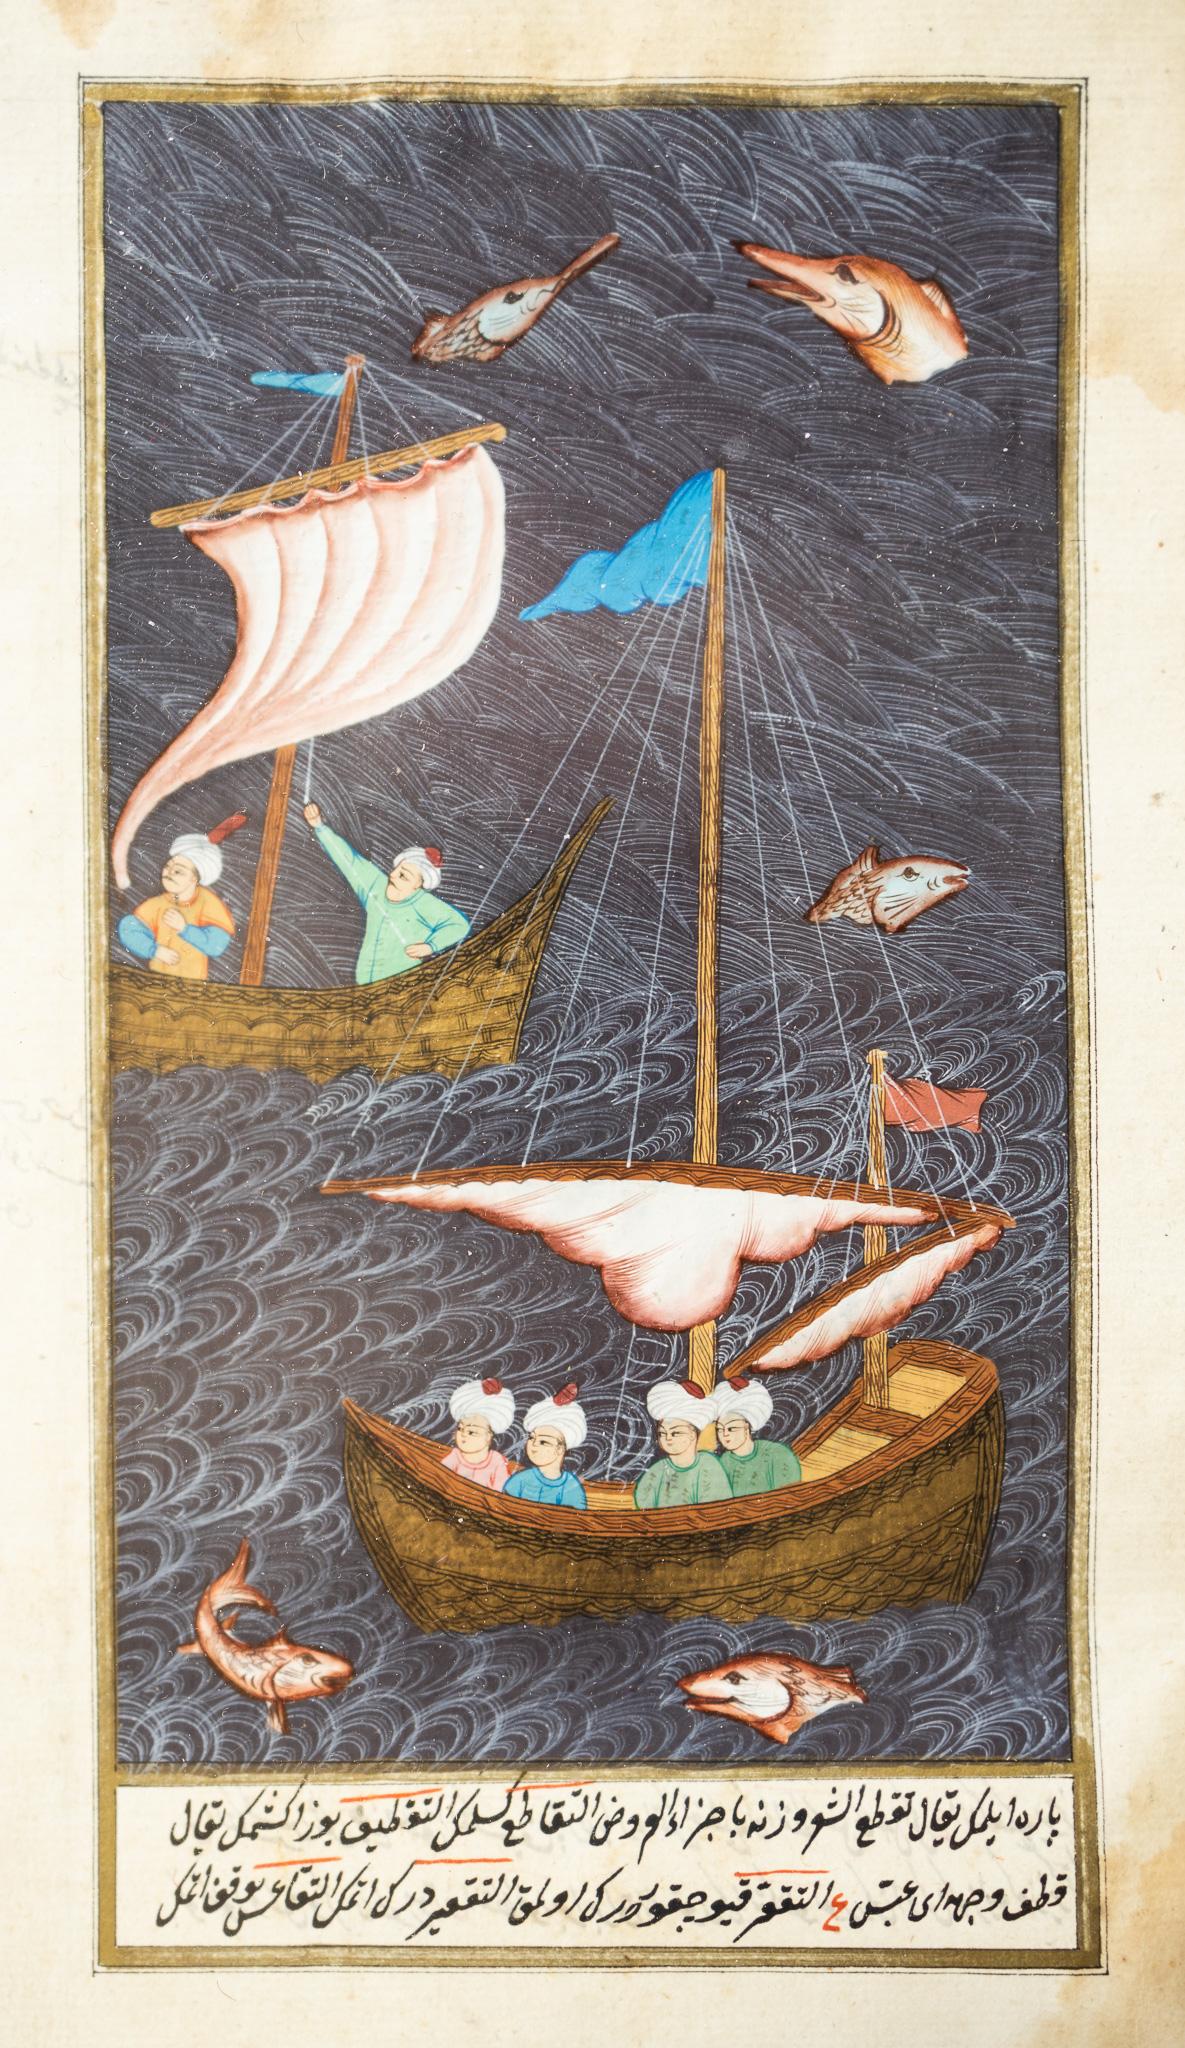 Illuminated manuscript with images of sailboats on the front and writing on the back, visible through the glass frame backing.

Image Size: 9.75